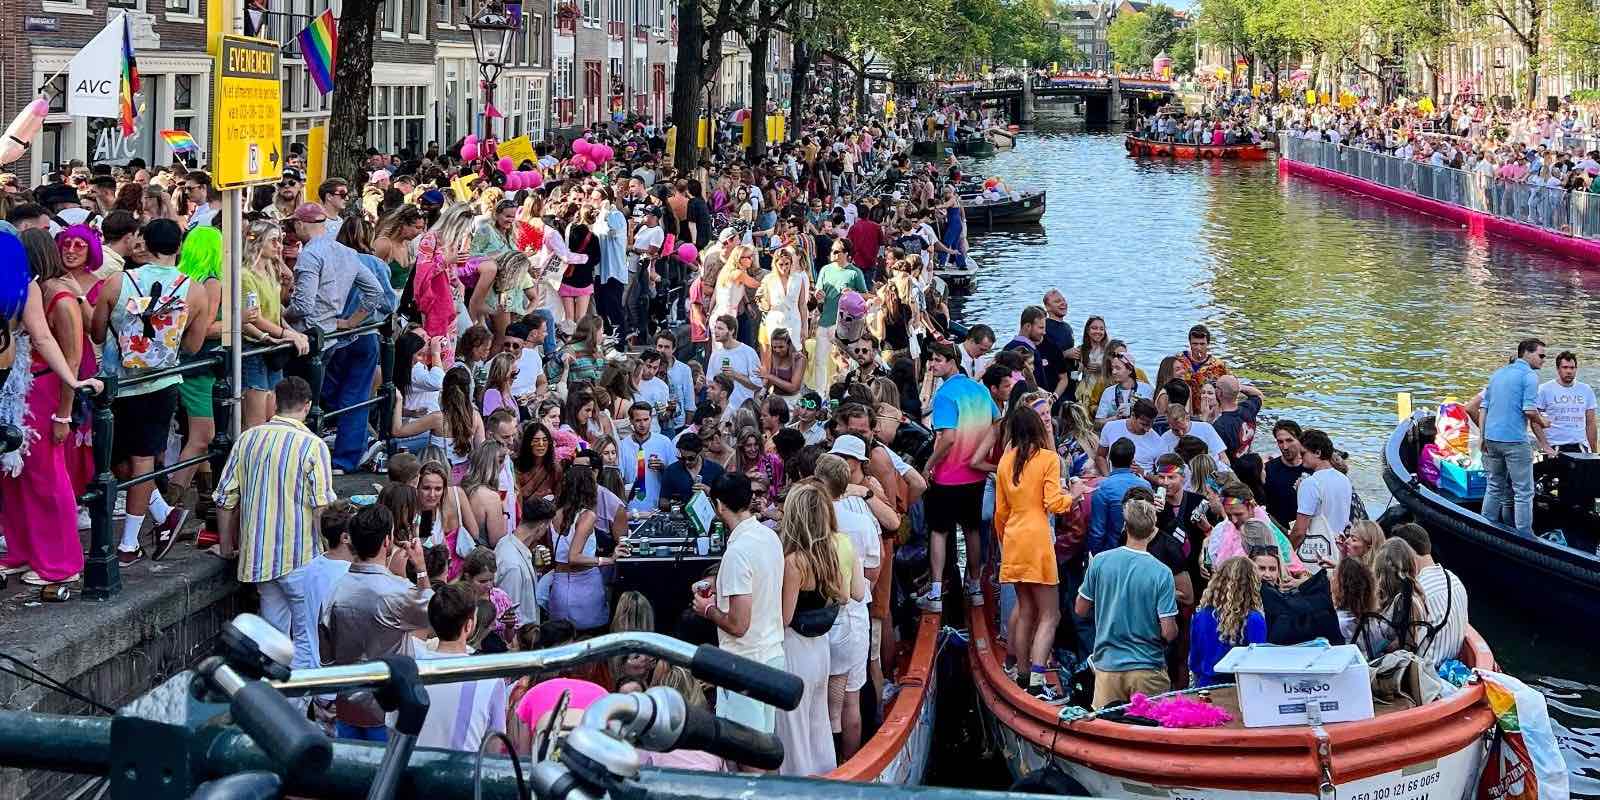 people gathered along the river in Amsterdam, with several individuals riding in boats